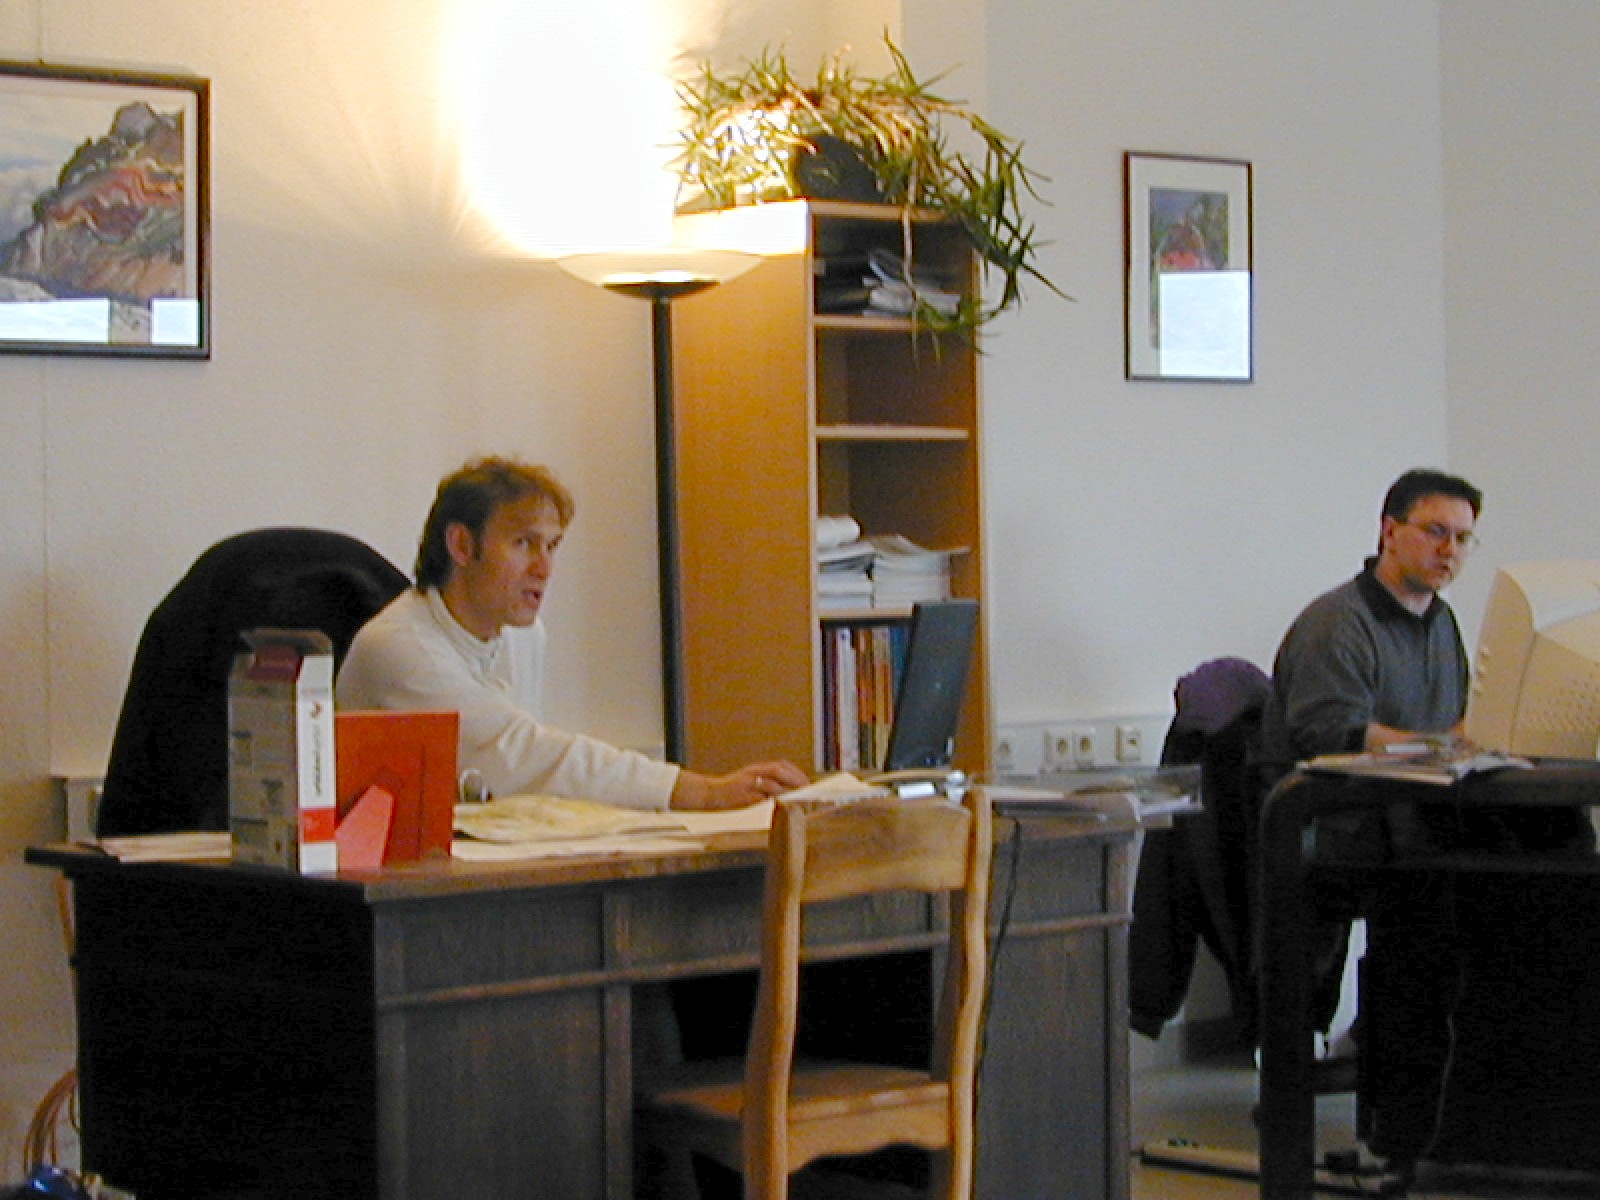 A photo from 1999 of Rainer Blanck and Pascal Miguet at their desks at work.